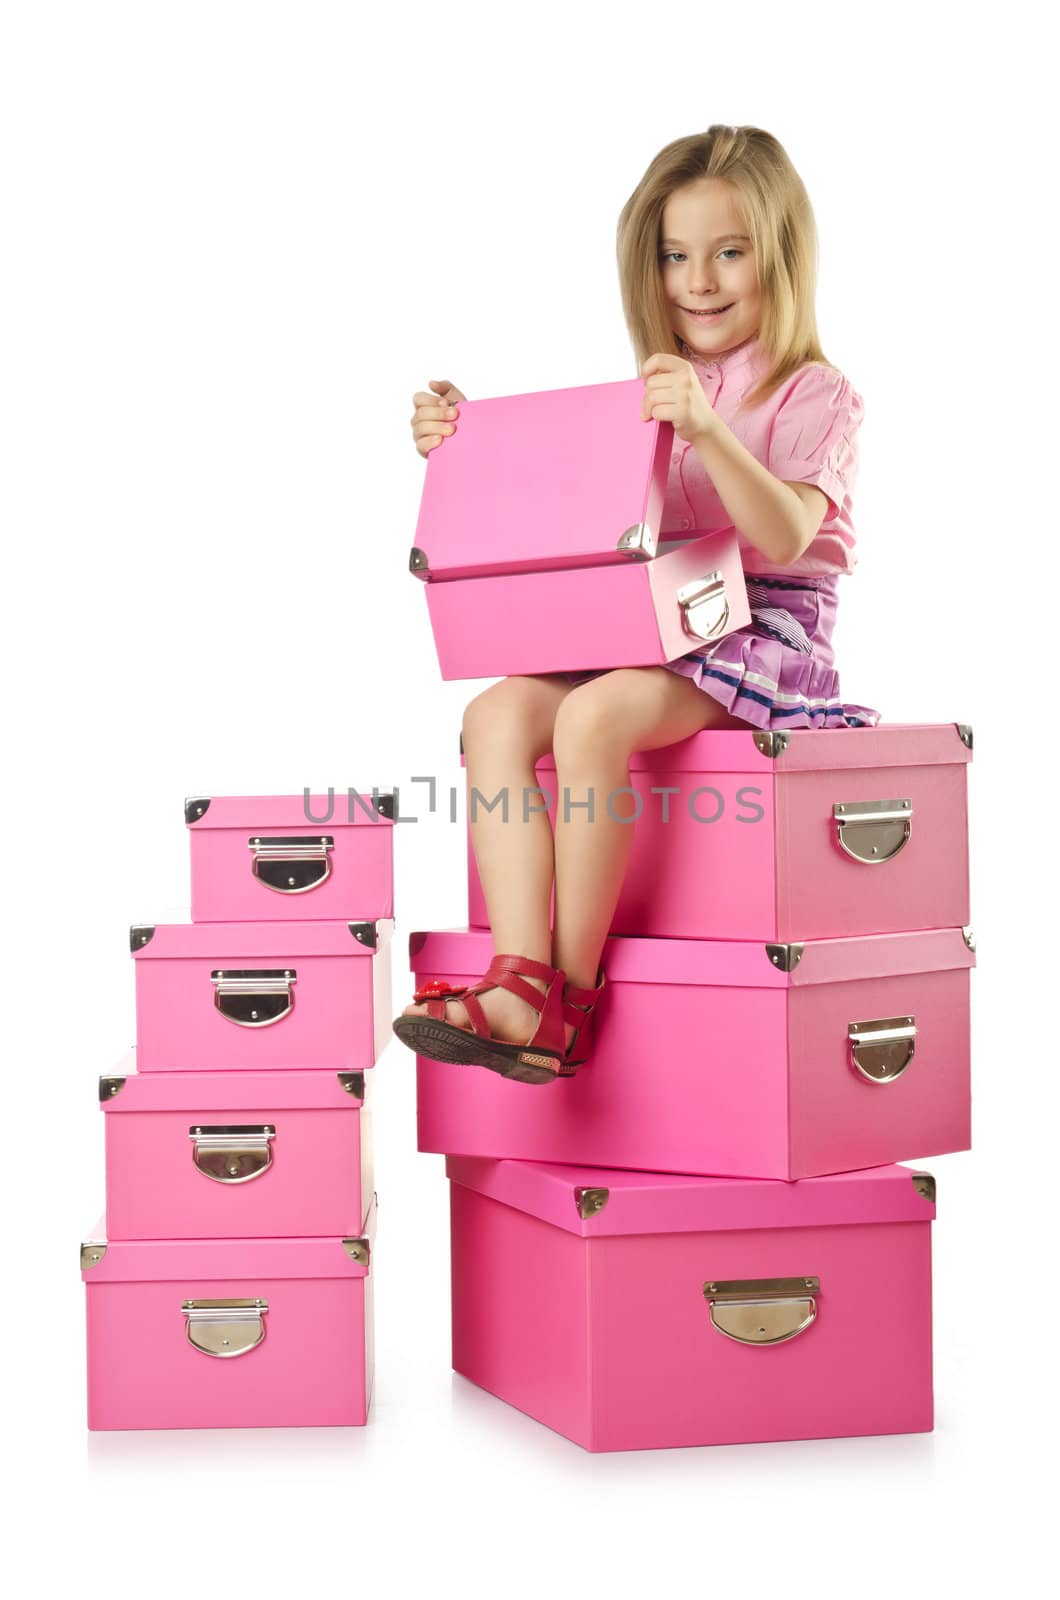 Little cute girl with lots of boxes by Elnur